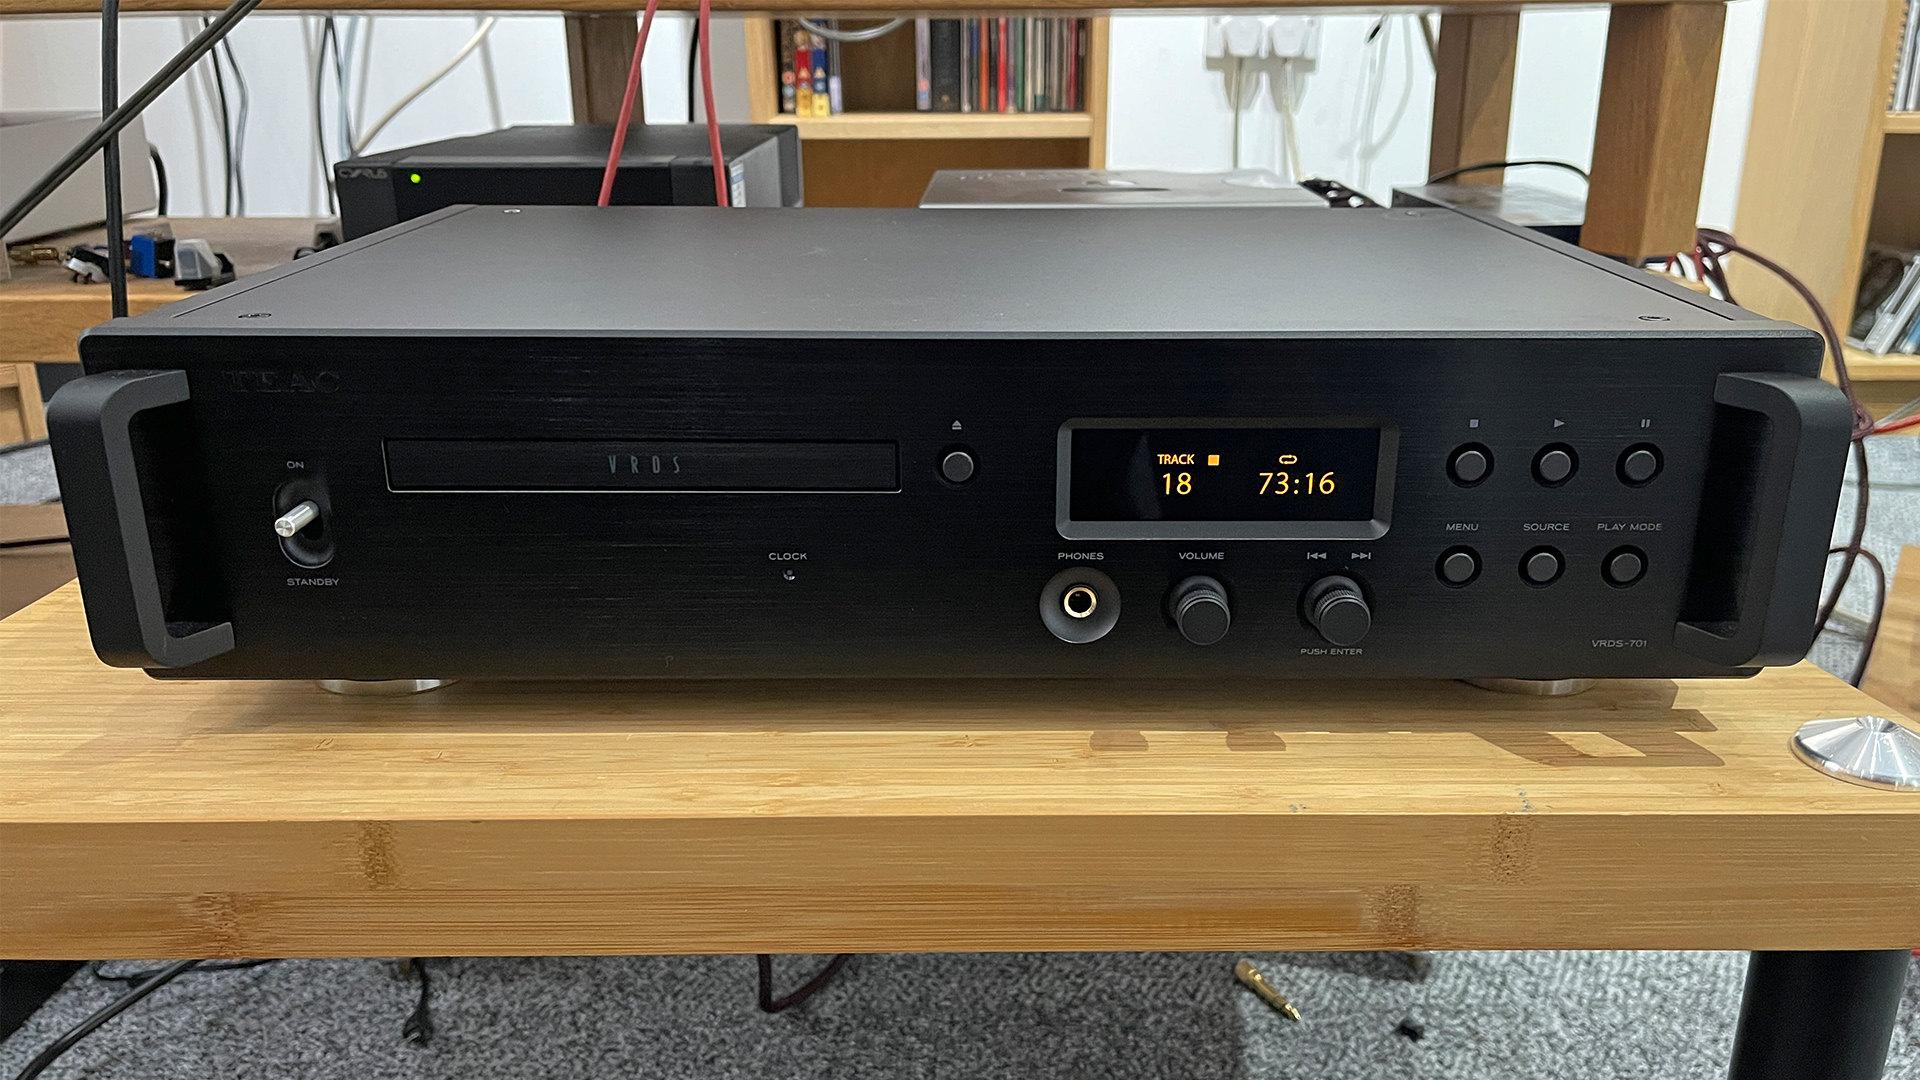 TEAC VRDS-701 review: a terrific premium CD player that's a joy to